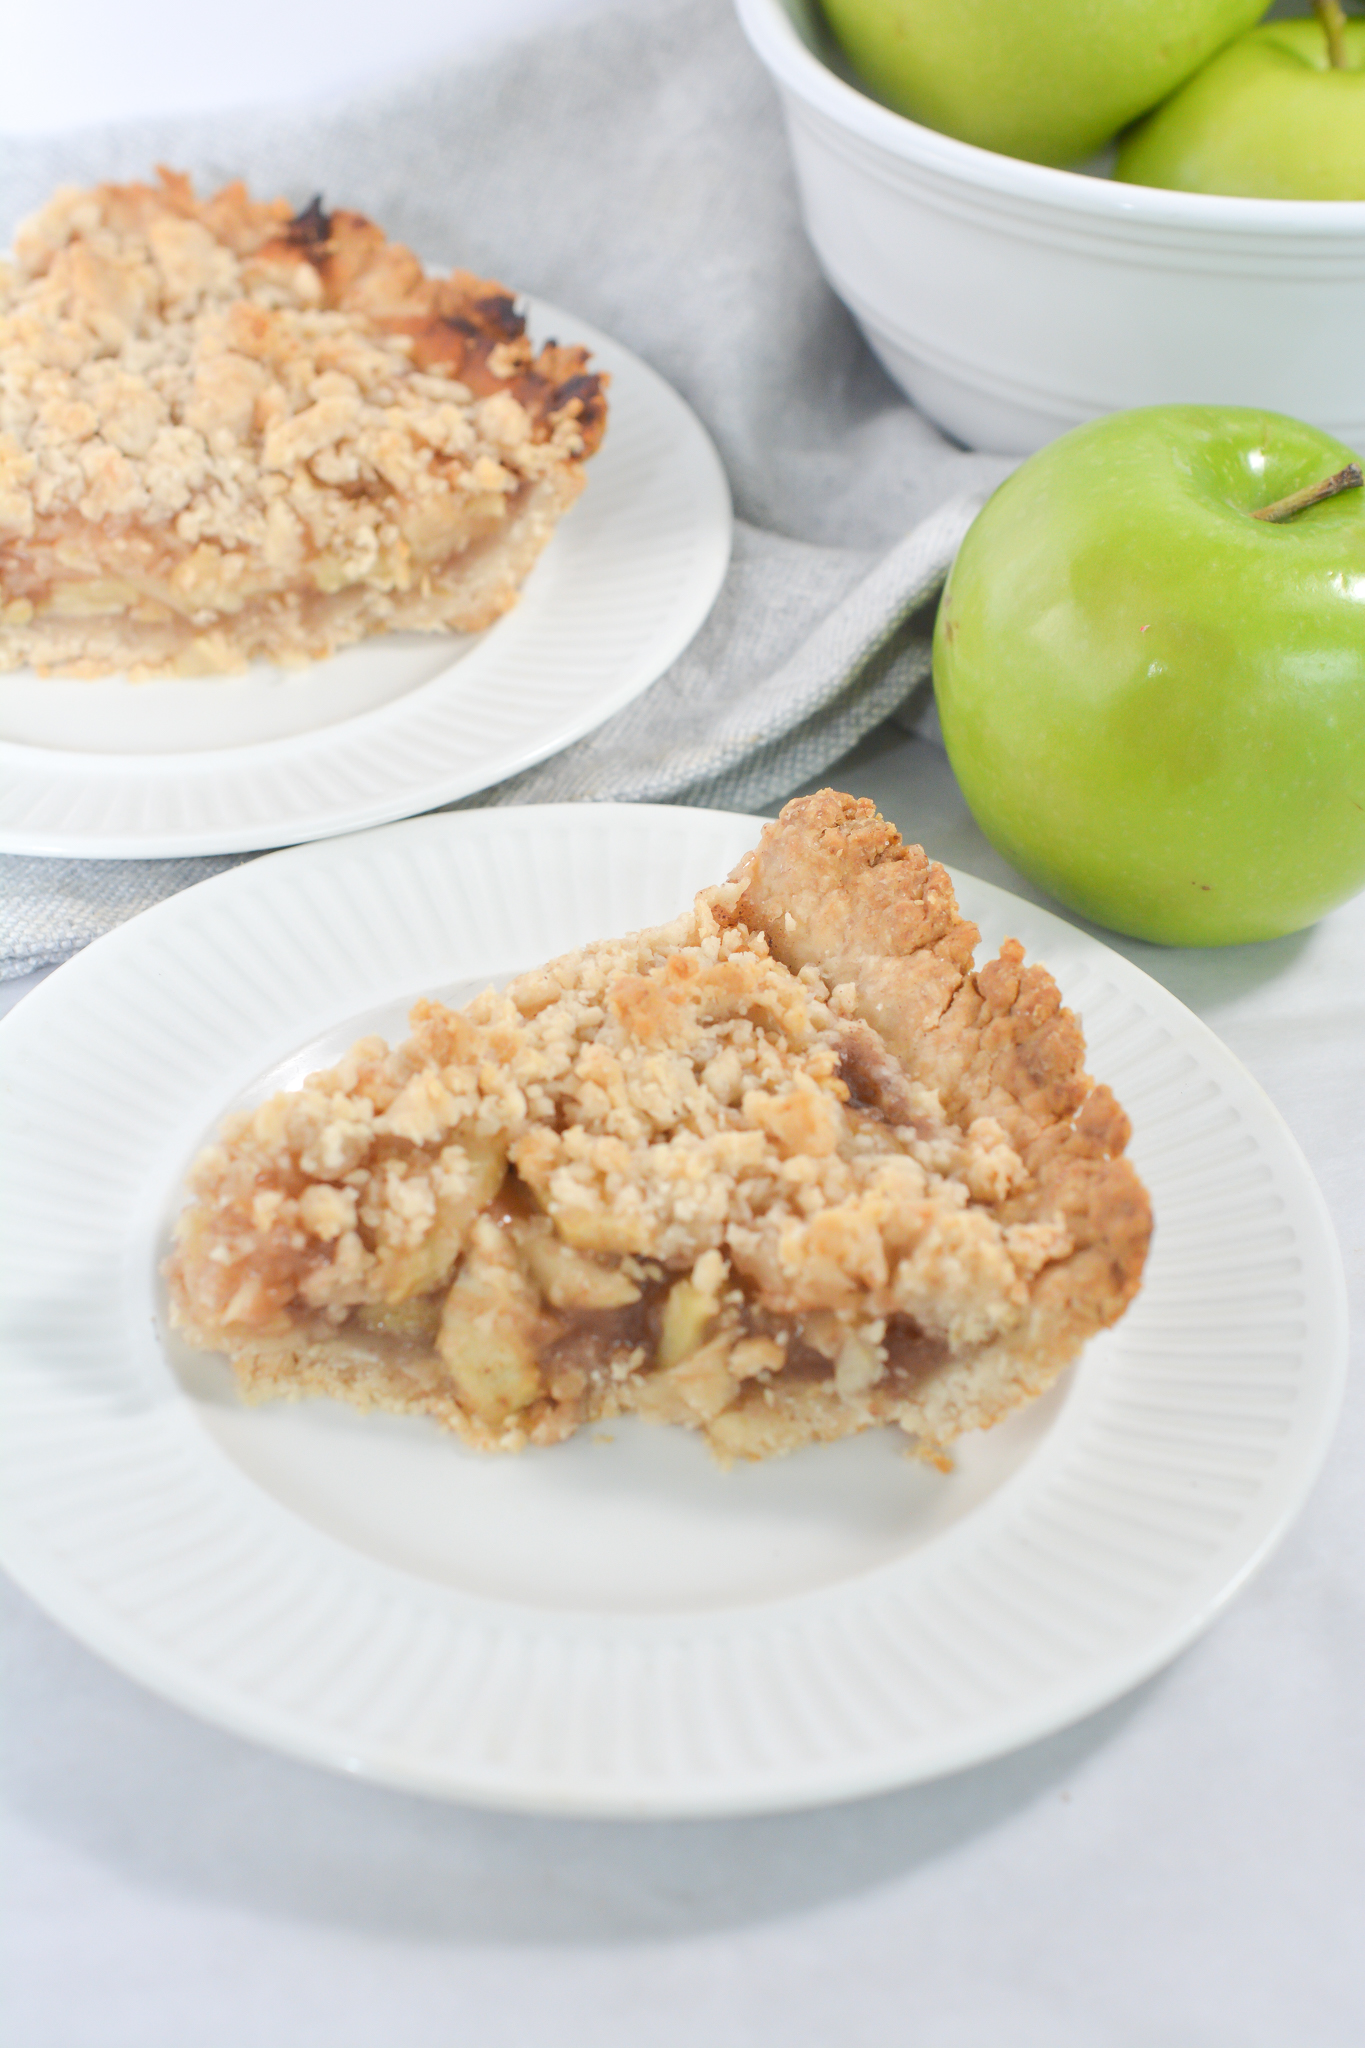 A slice of Easy Apple Pie with Crumb Topping.